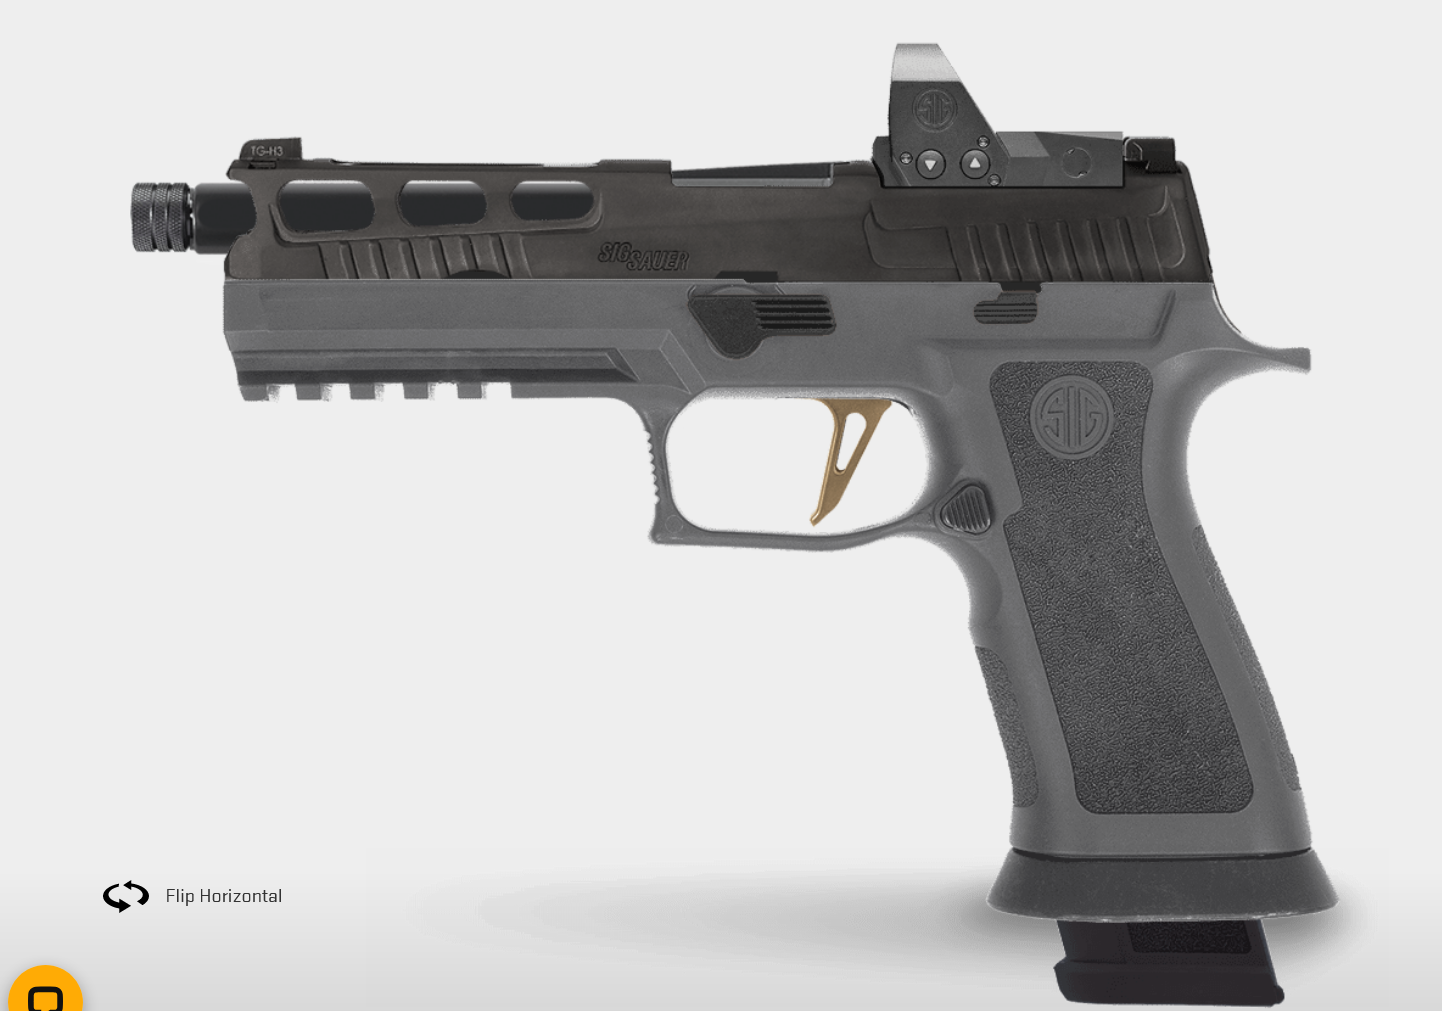 P320 X-5 Legion with pro cut slide and threaded barrel